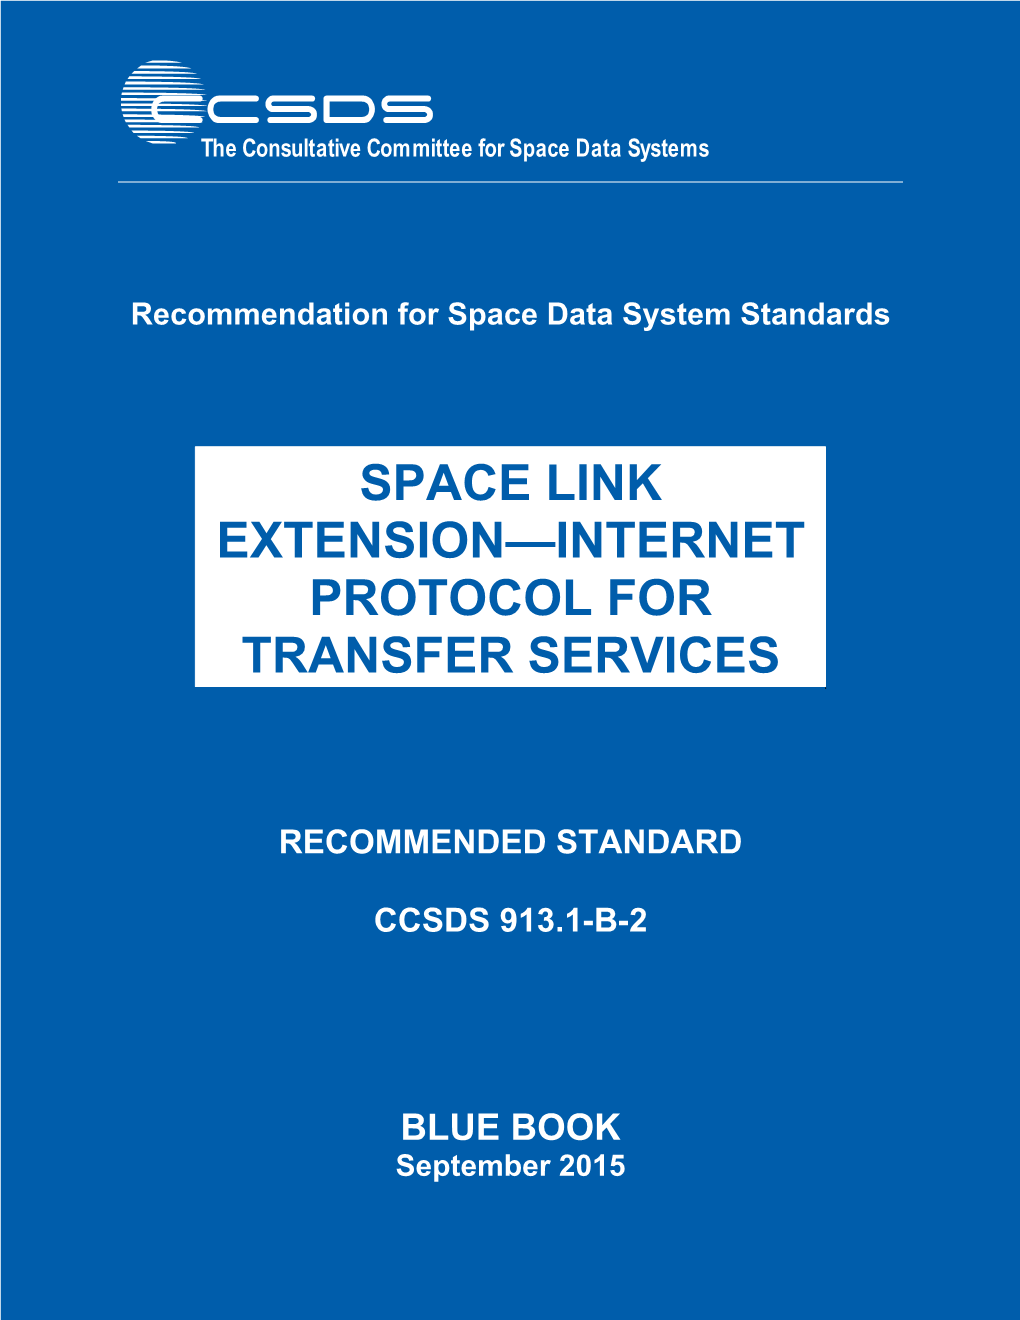 Space Link Extension—Internet Protocol for Transfer Services